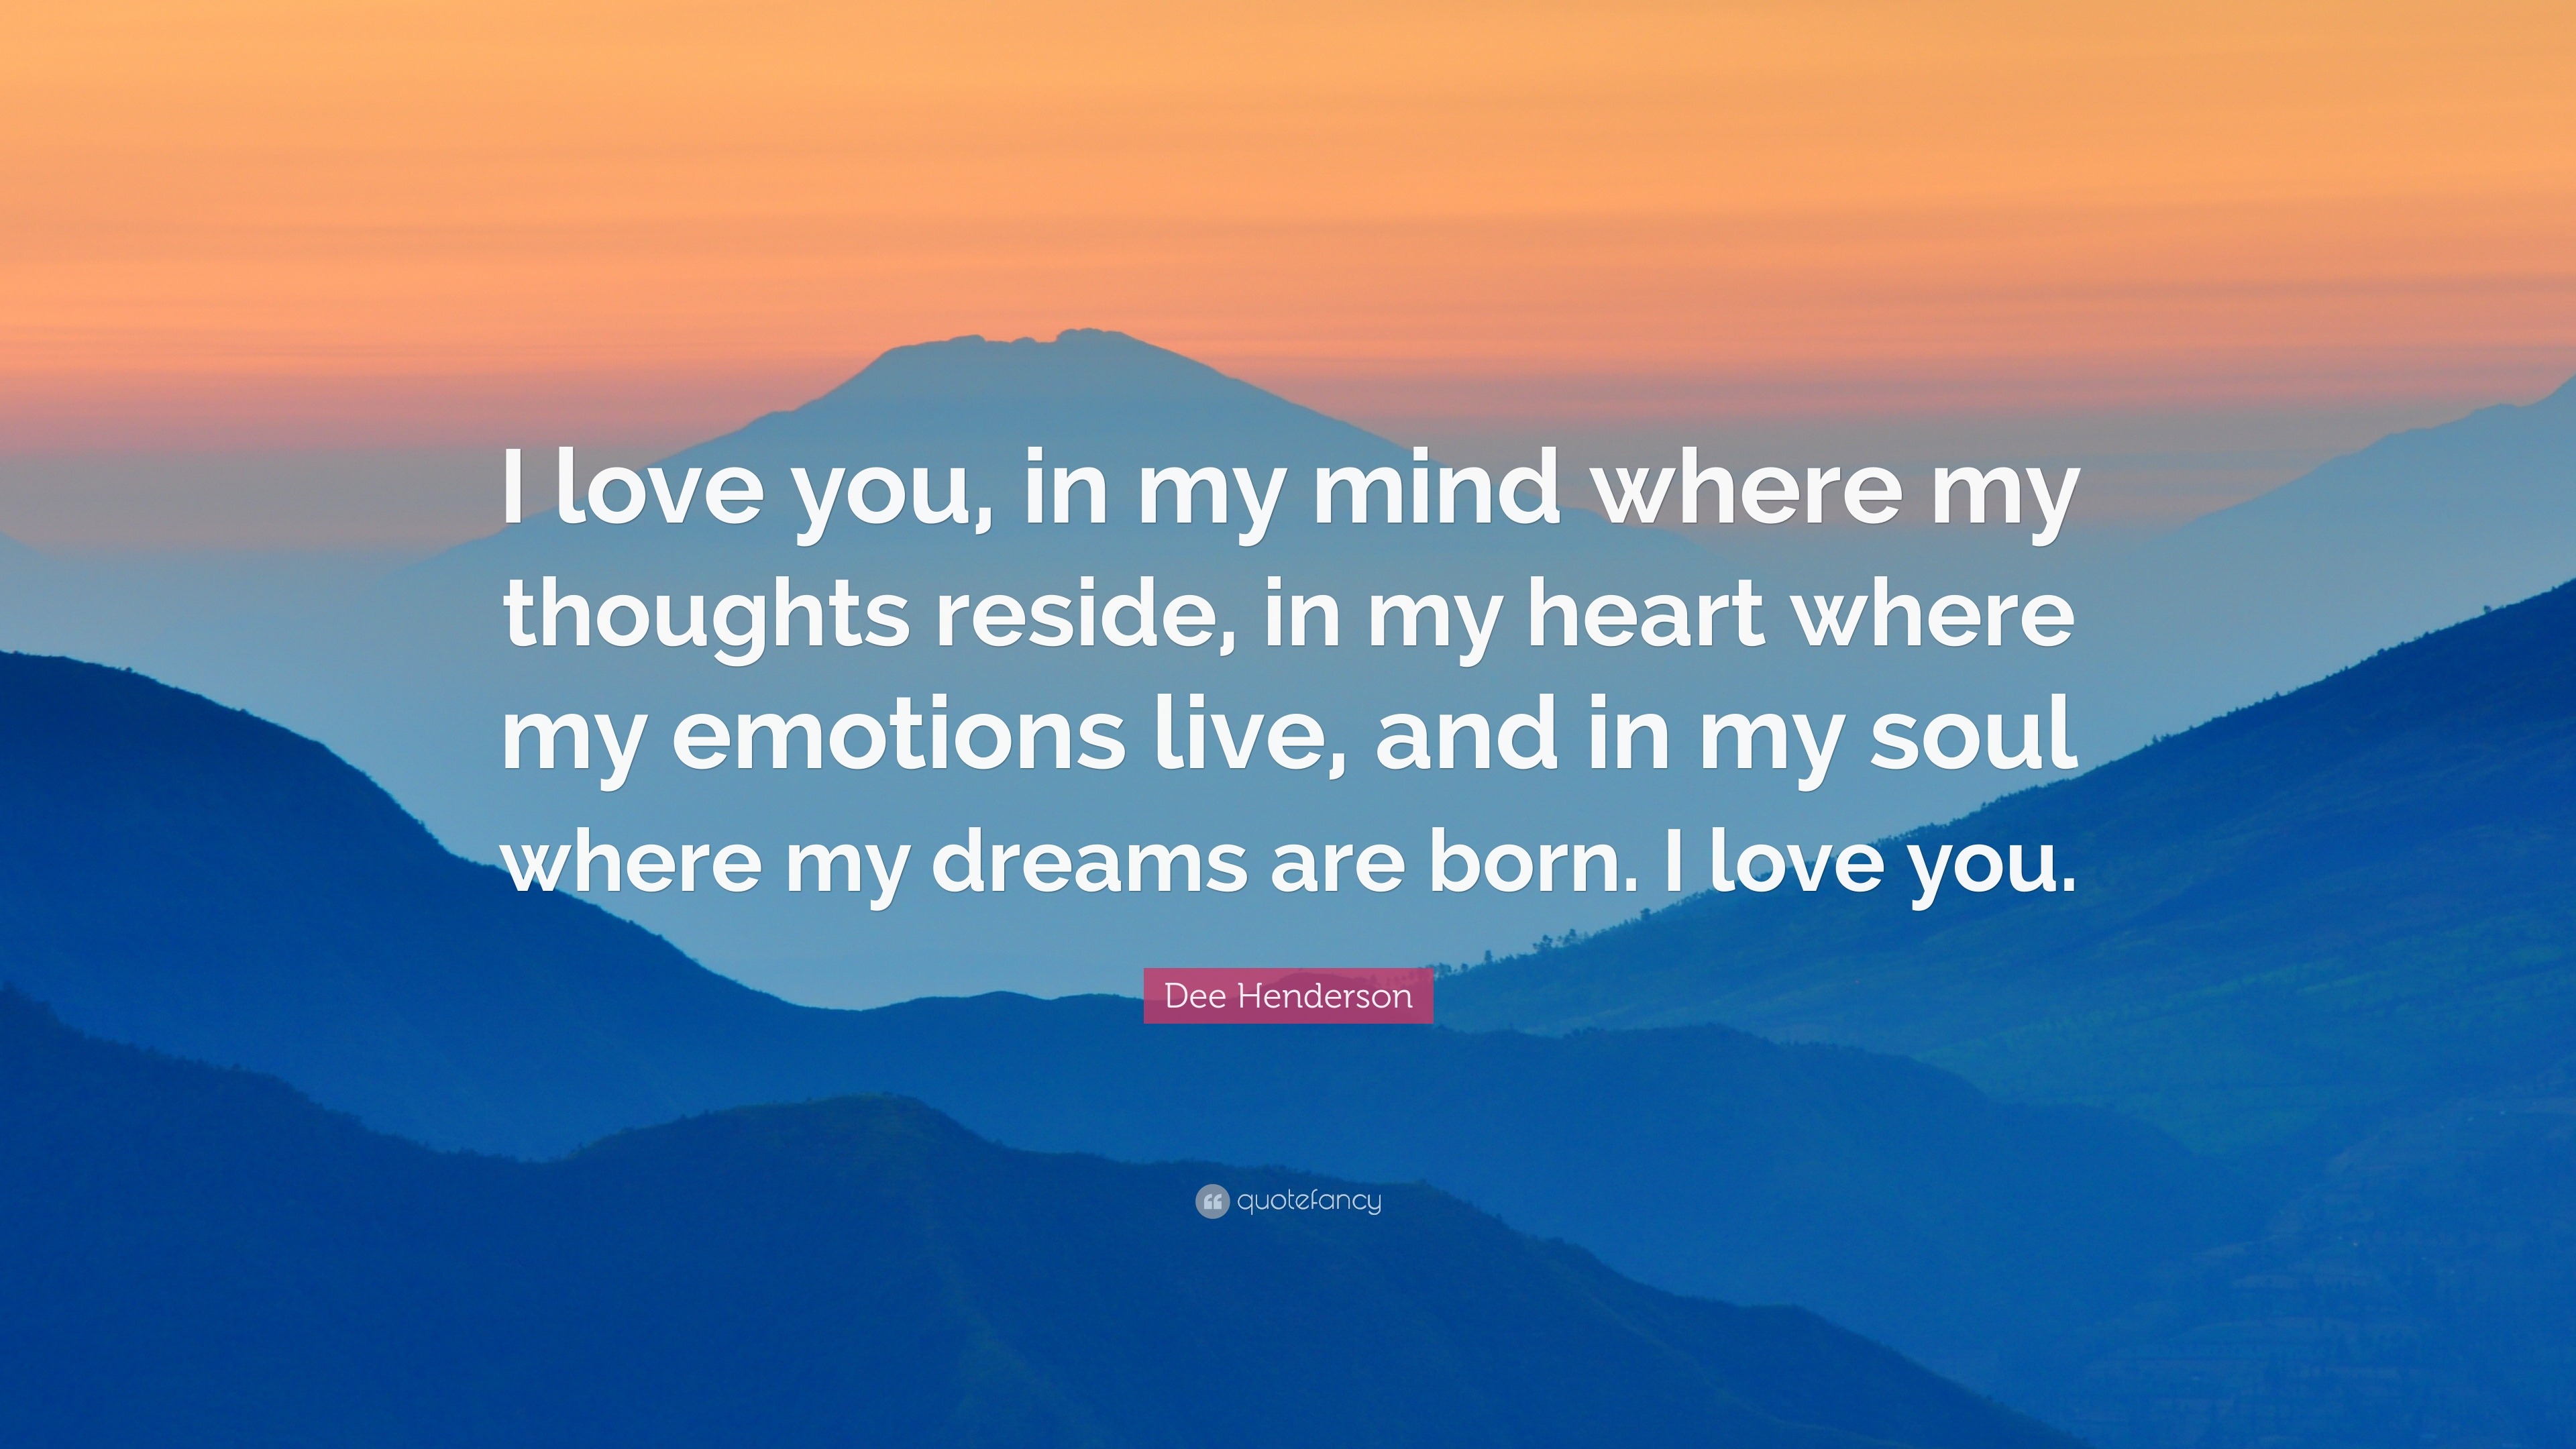 Dee Henderson Quote “I love you in my mind where my thoughts reside